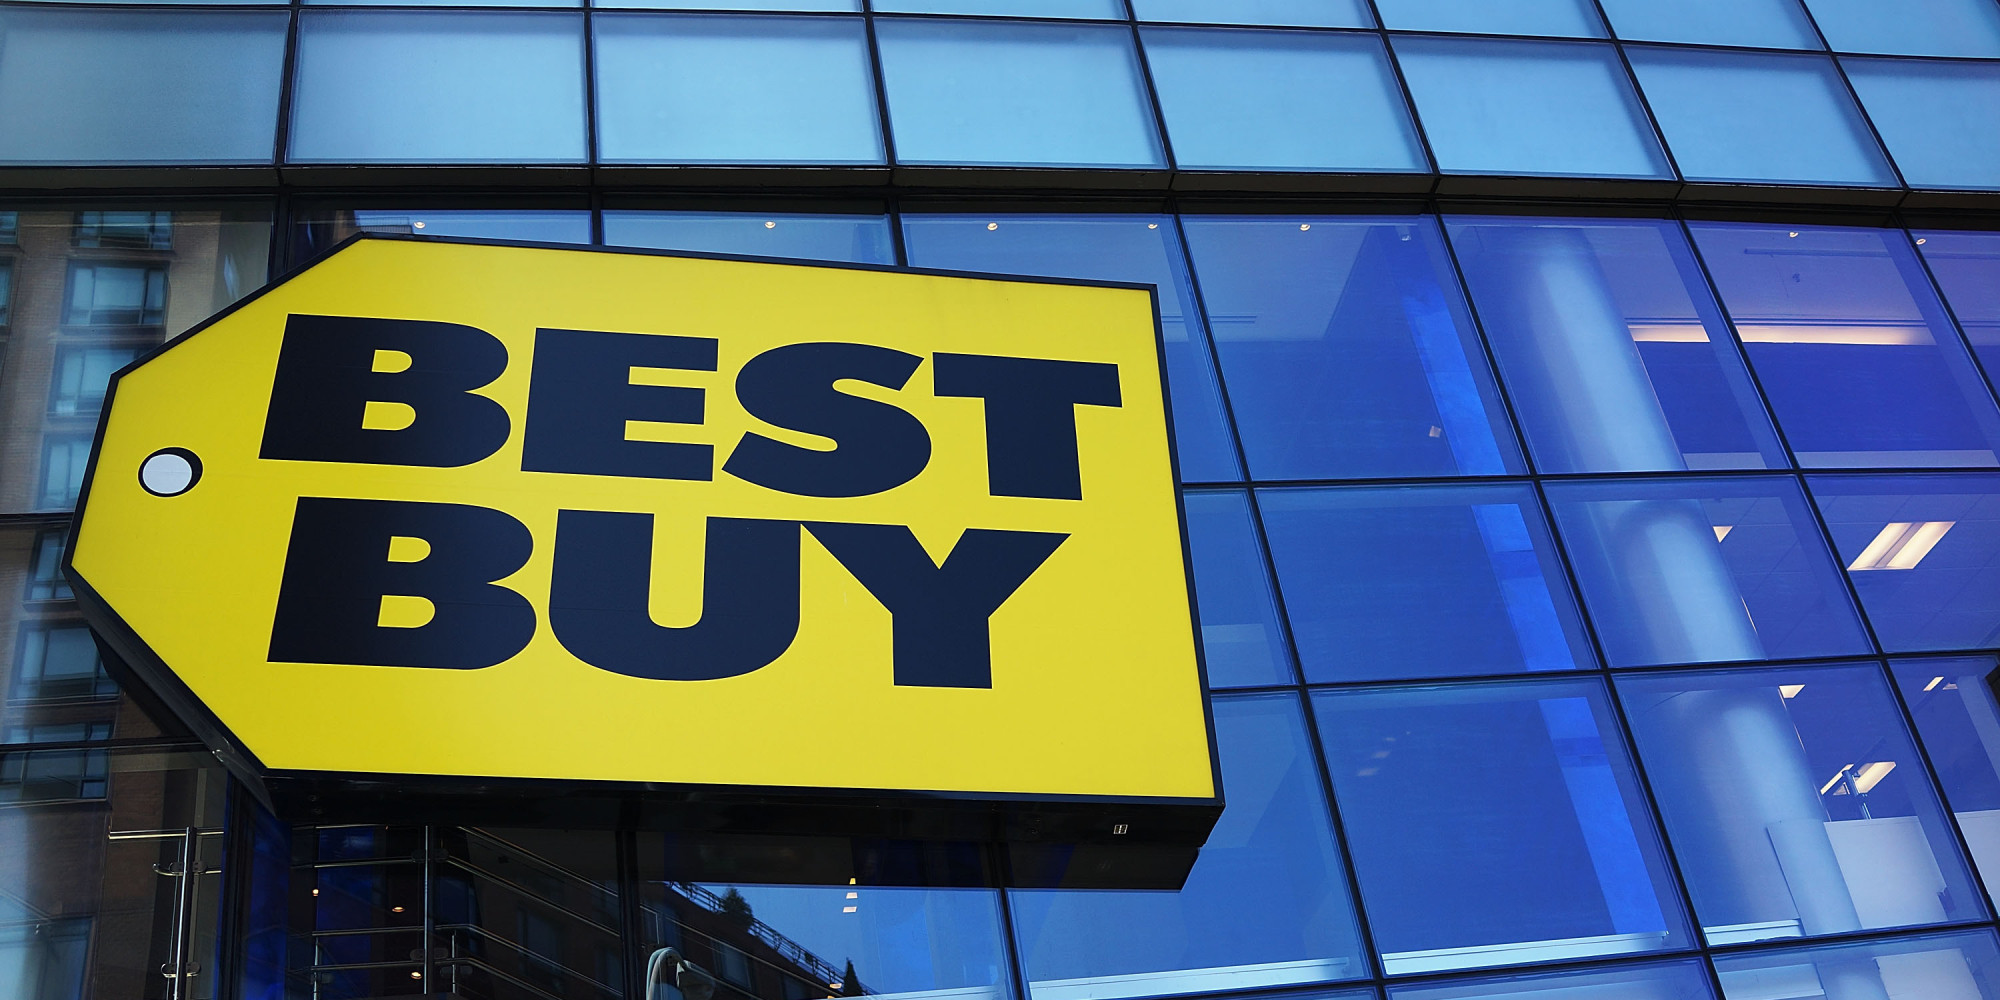 Best Buy Slows Closures as Stores Seen Key to Digital Shopping. Orenda Real Estate Services